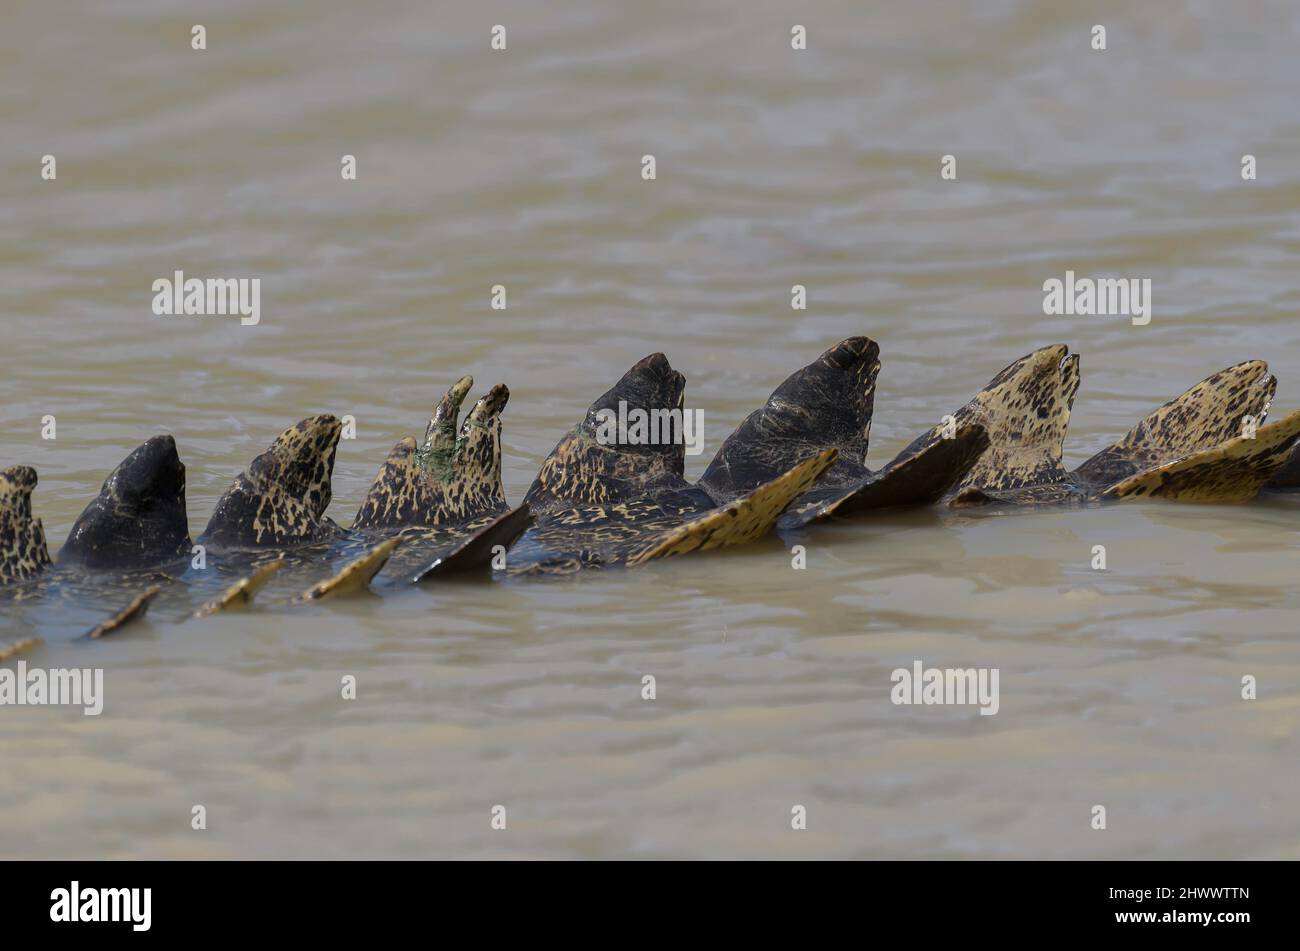 A close up of the scales on a large crocodile in the Yellow Water billabong, Kakadu, Northern Territory, Australia Stock Photo